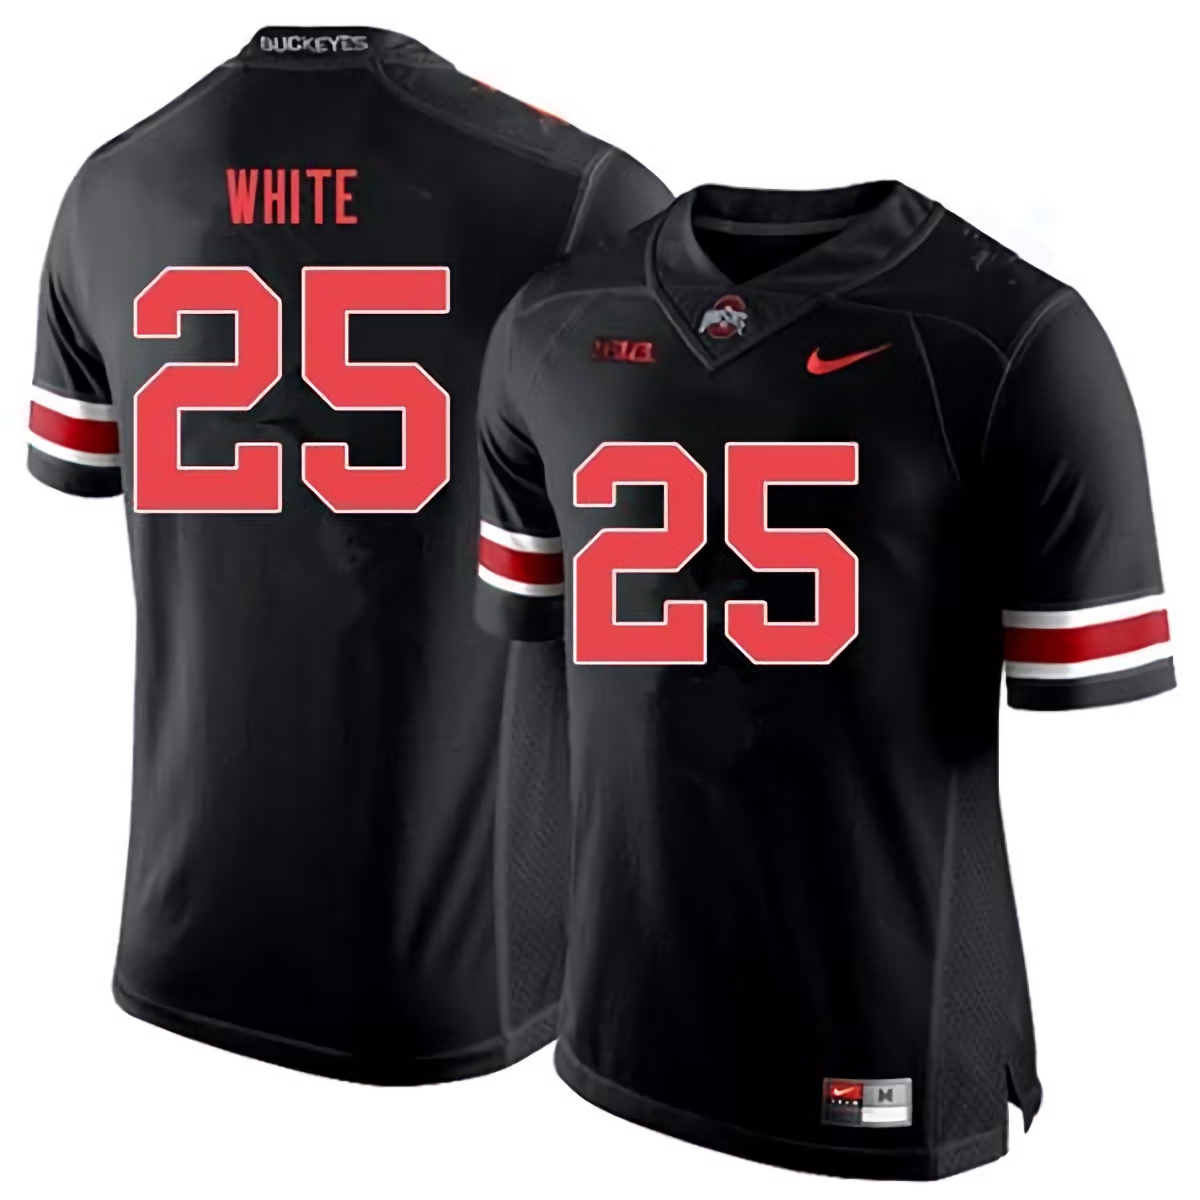 Brendon White Ohio State Buckeyes Men's NCAA #25 Nike Black Out College Stitched Football Jersey PHE8556TB